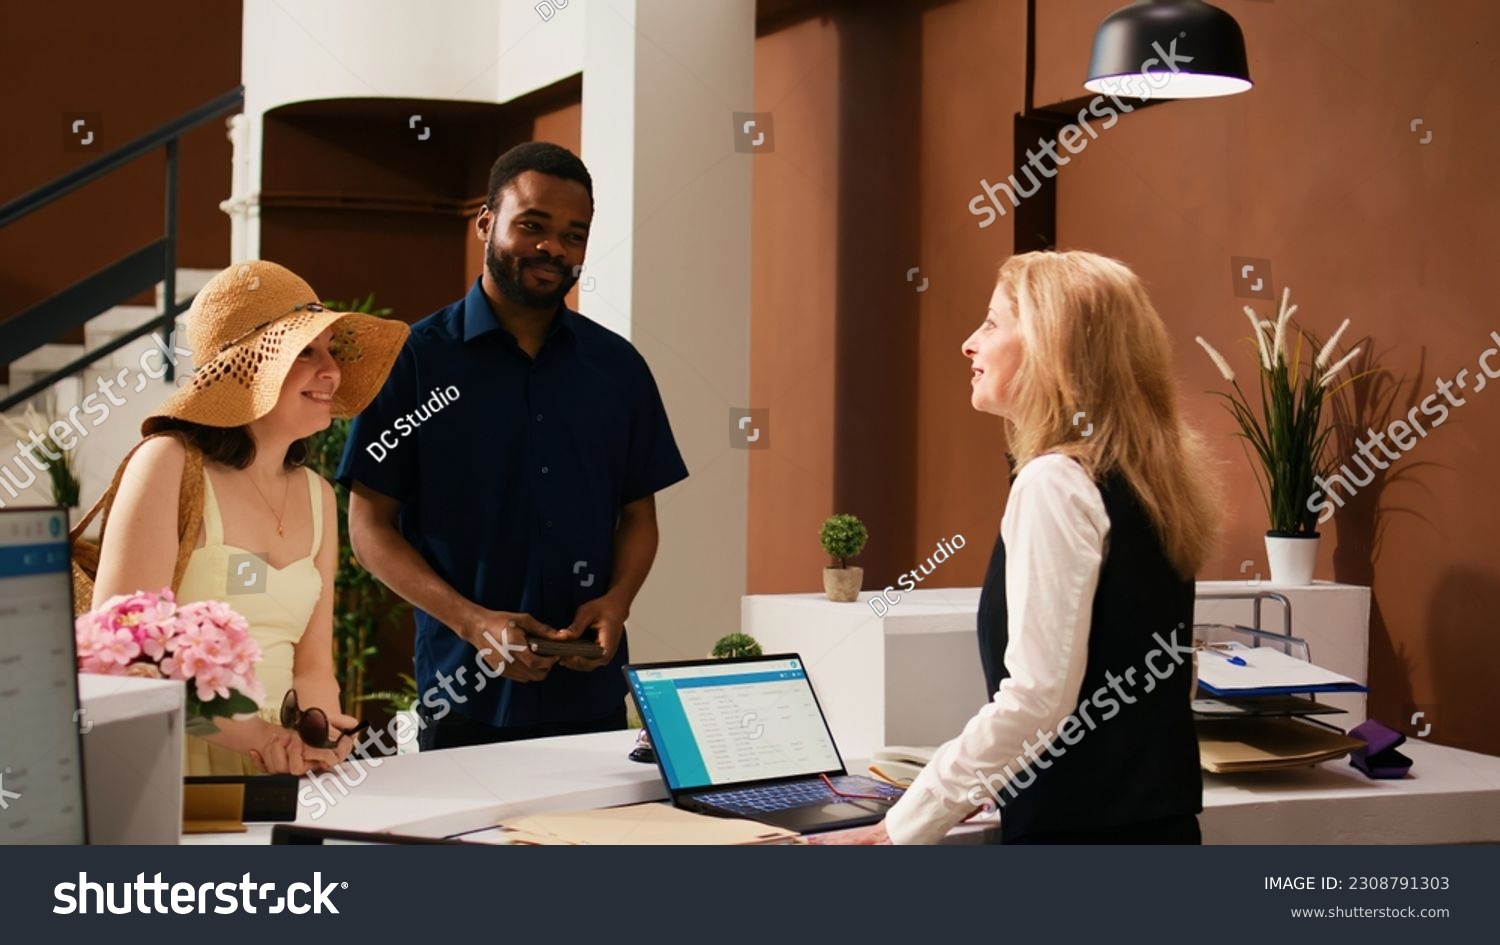 Hotel concierge greeting tourists at reception upon their arrival, welcoming guests at luxury tropical resort. Receptionist preparing to check in guests, providing excellent service. #2308791303